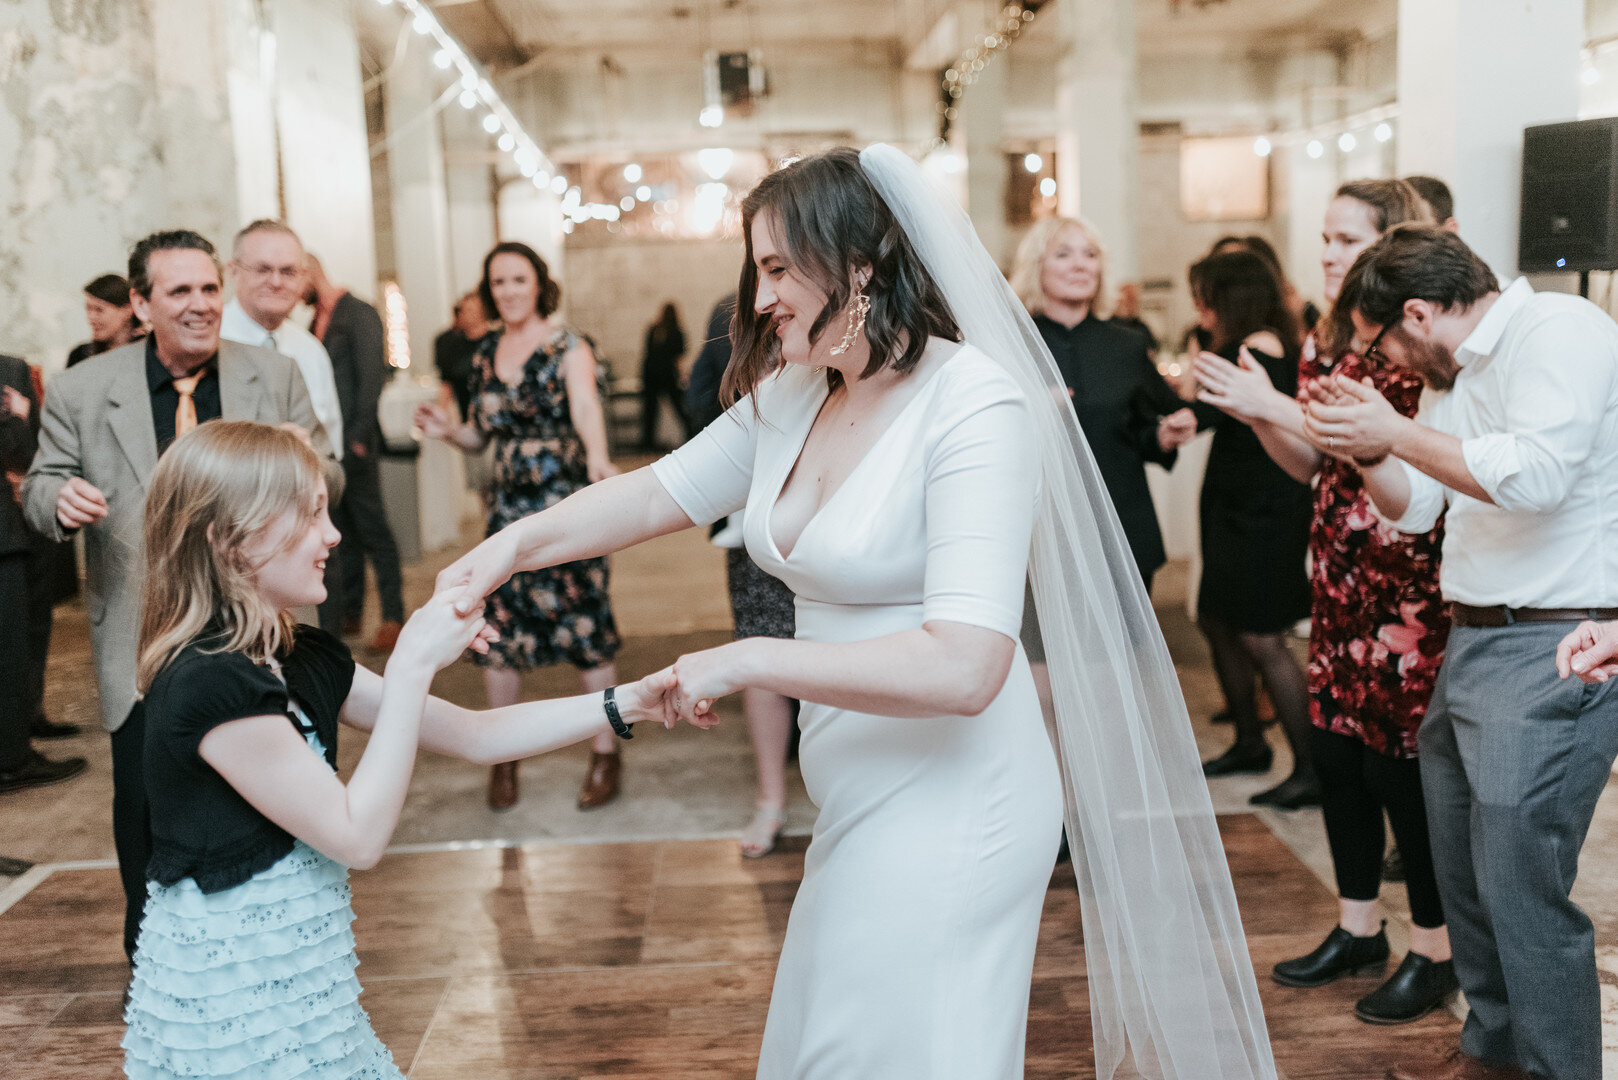 Rachel and Matthew transformed an empty non-profit building where she works into an industrial urban chic wedding in Philadelphia, Pennsylvania. Photographed by Elizabeth Gibbs Photography.